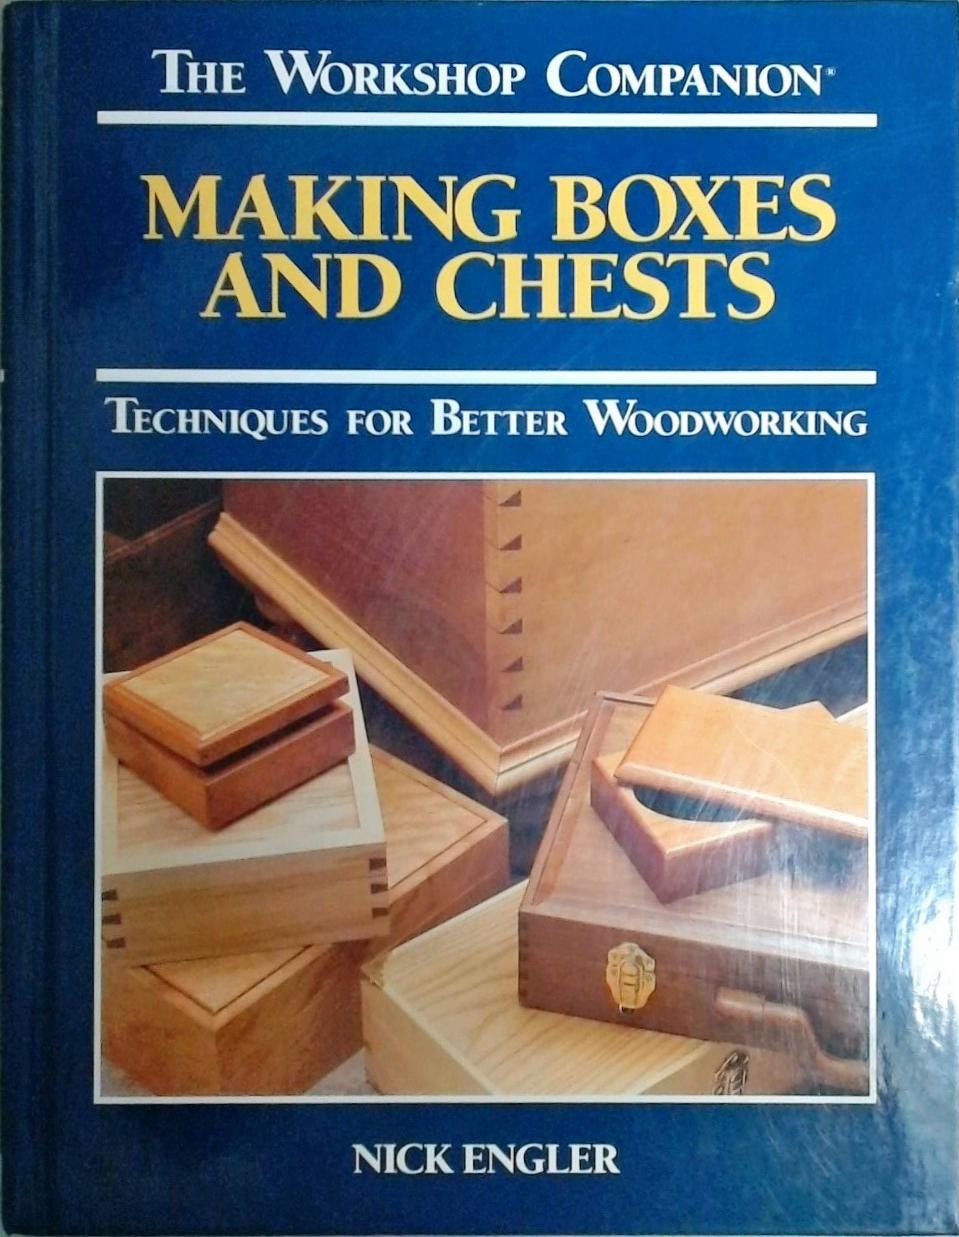 Making Boxes and Chests